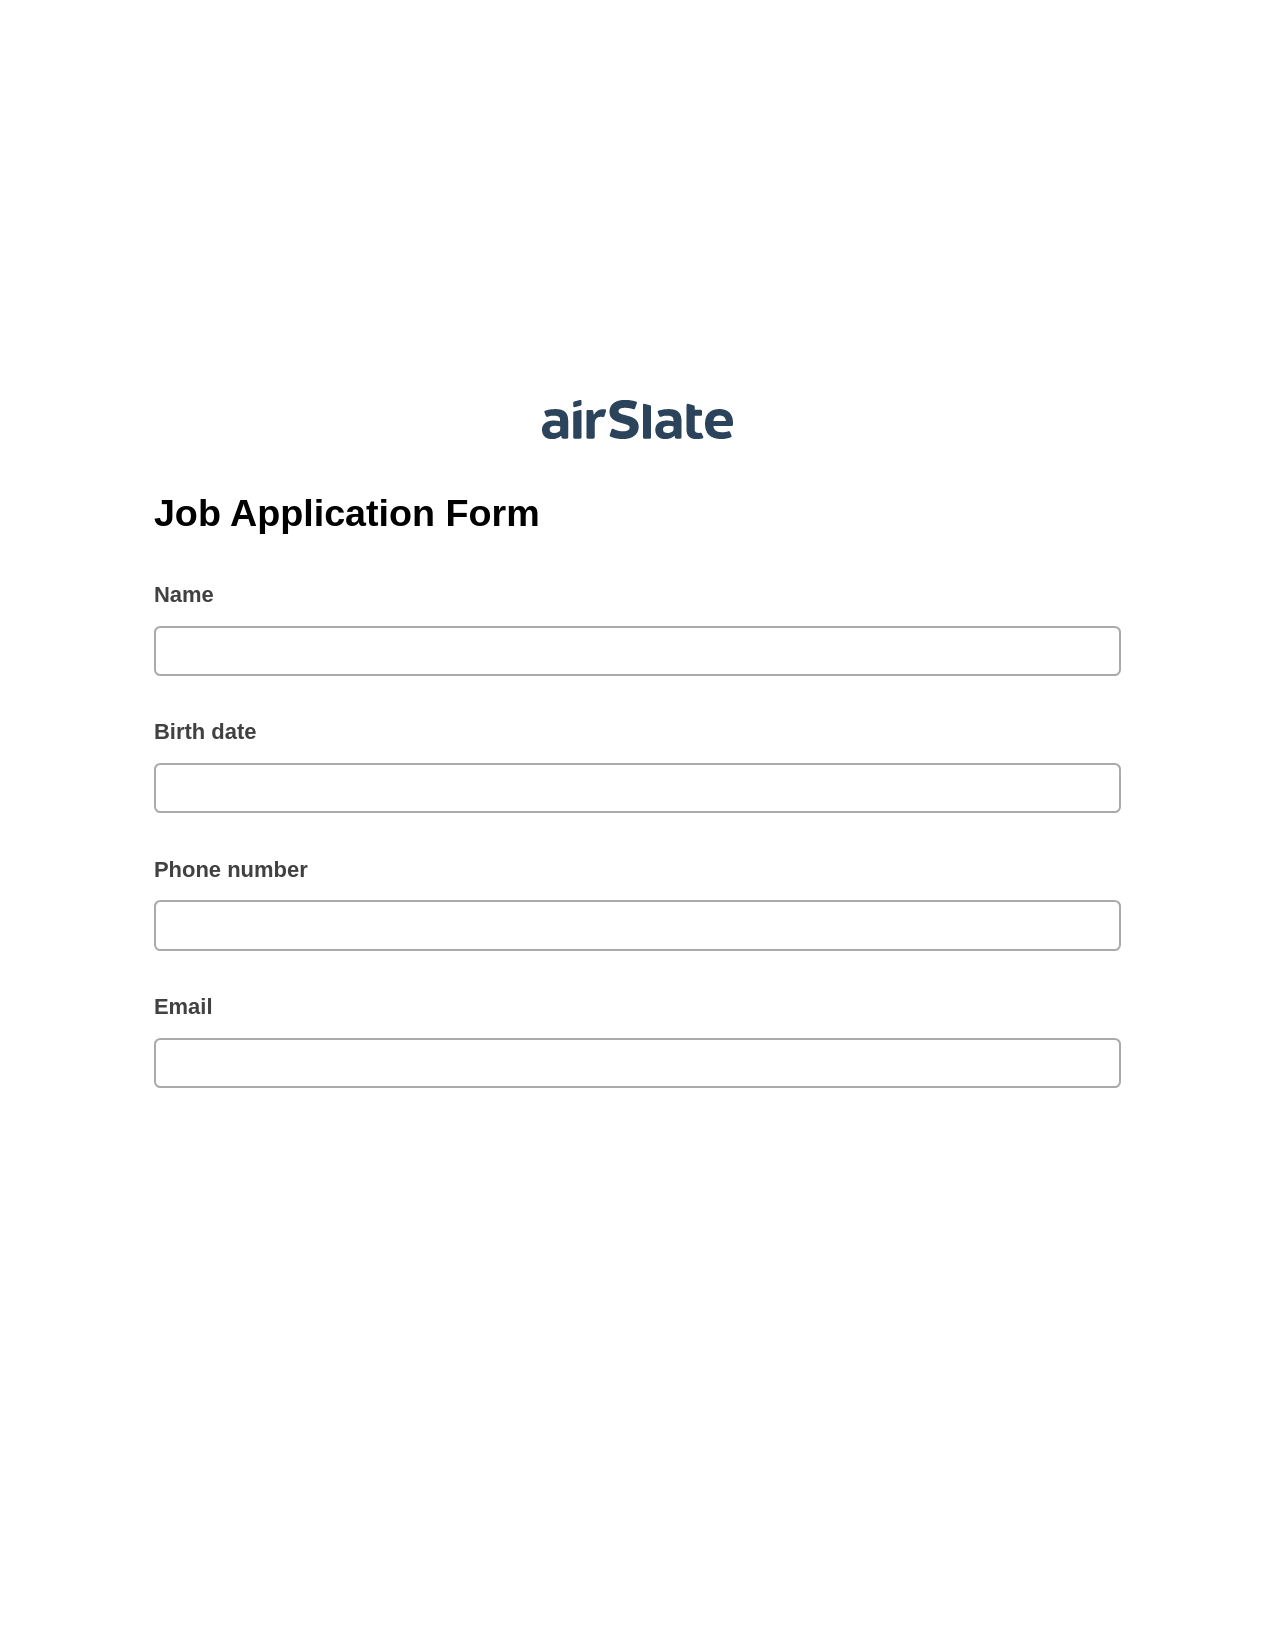 Multirole Job Application Form Pre-fill from Excel Spreadsheet Bot, Export to MS Dynamics 365 Bot, Archive to SharePoint Folder Bot